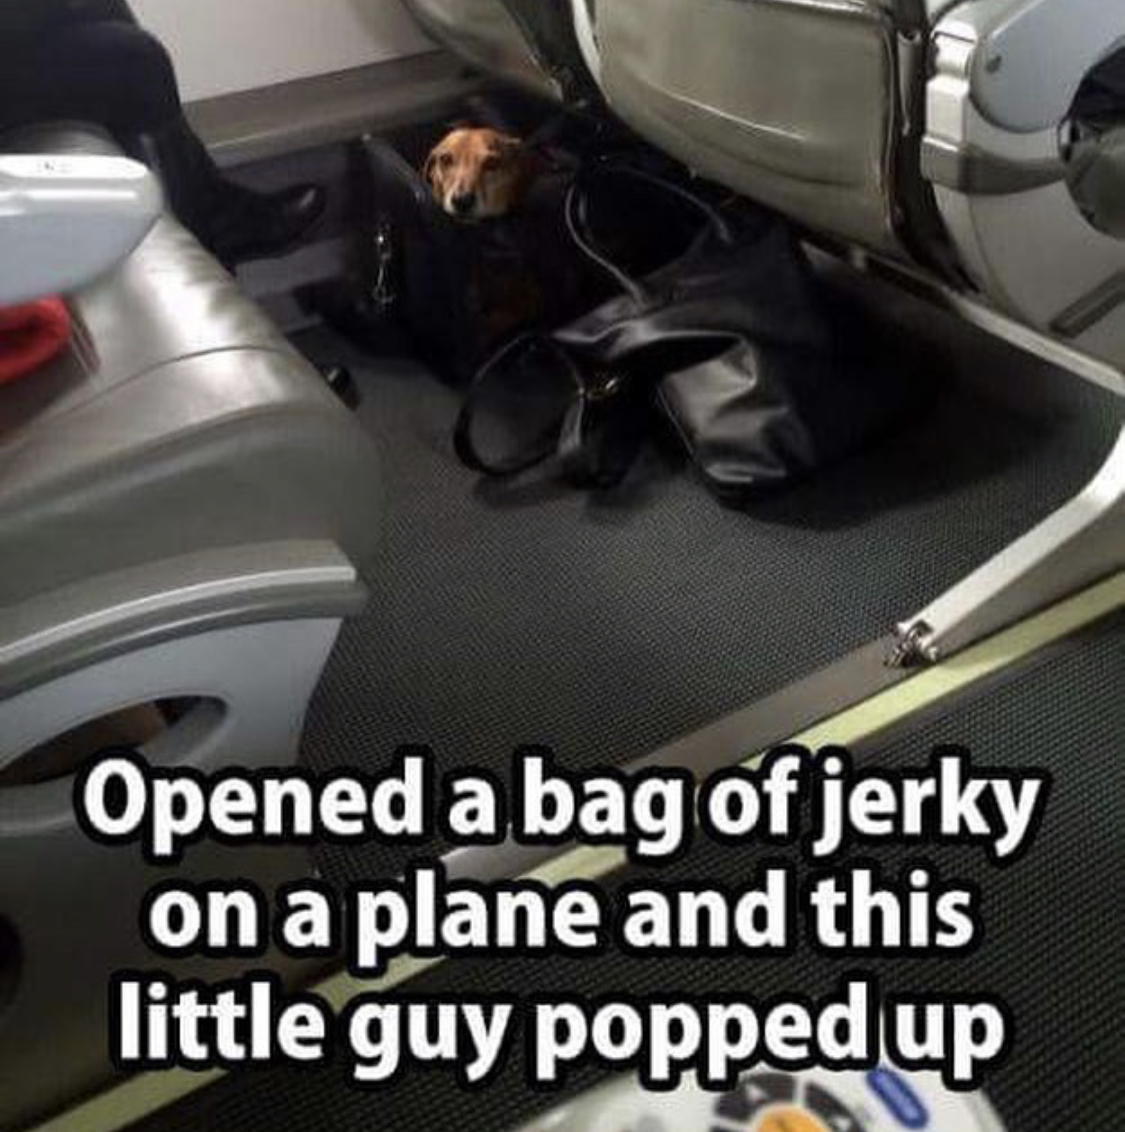 Dachshund inside a bag inside the plane photo with text - Opened a bag of jerky on a plane and this little guy popped up